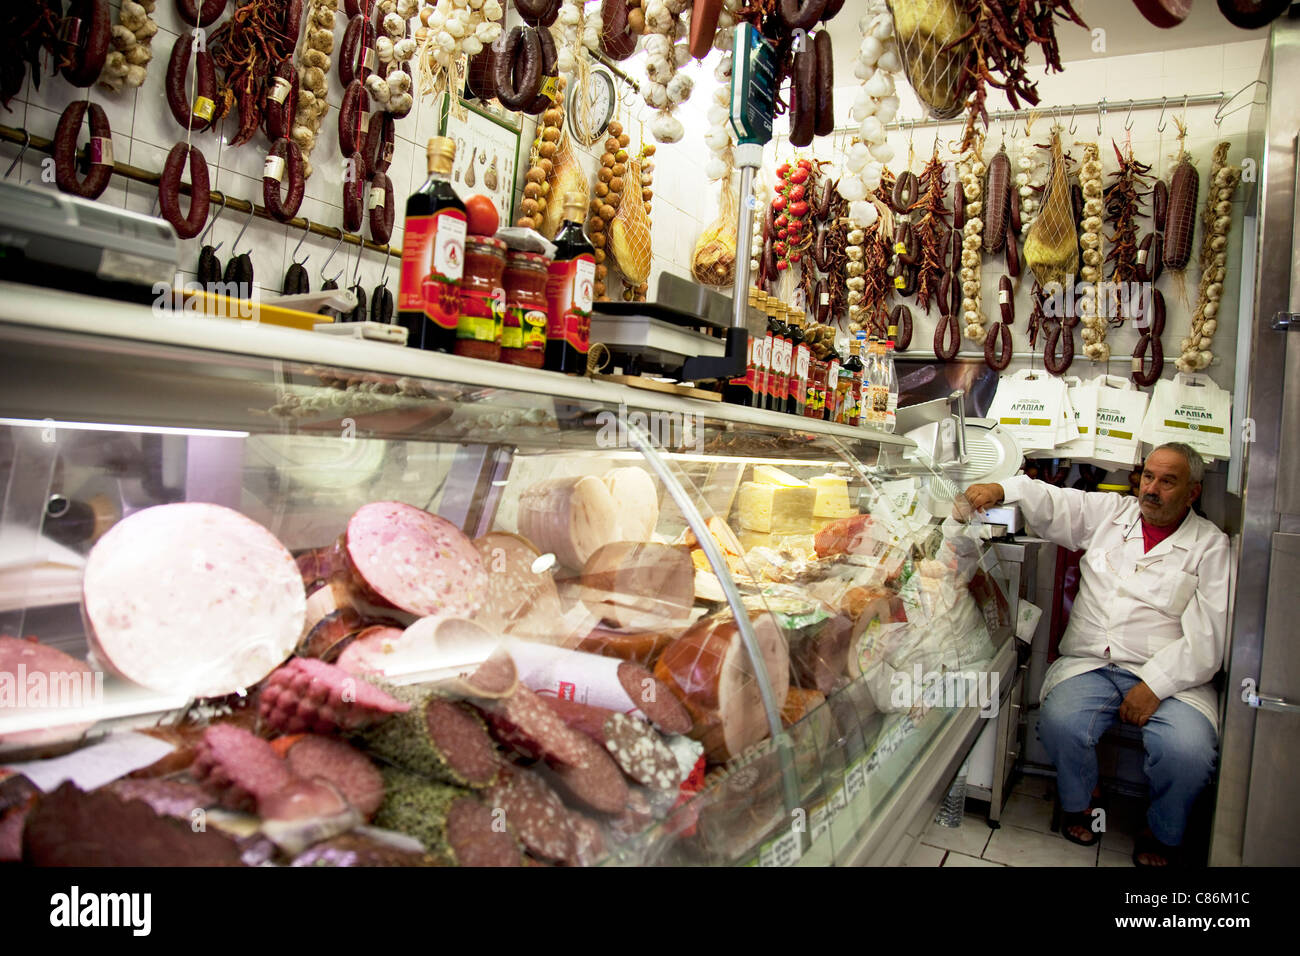 Delicatessen selling cured meats and salami in Psiri. Athens is the capital and largest city of Greece. It dominates the Attica periphery and is one of the world's oldest cities, as its recorded history spans around 3,400 years. Classical Athens was a powerful city-state. A centre for the arts, learning and philosophy. Stock Photo